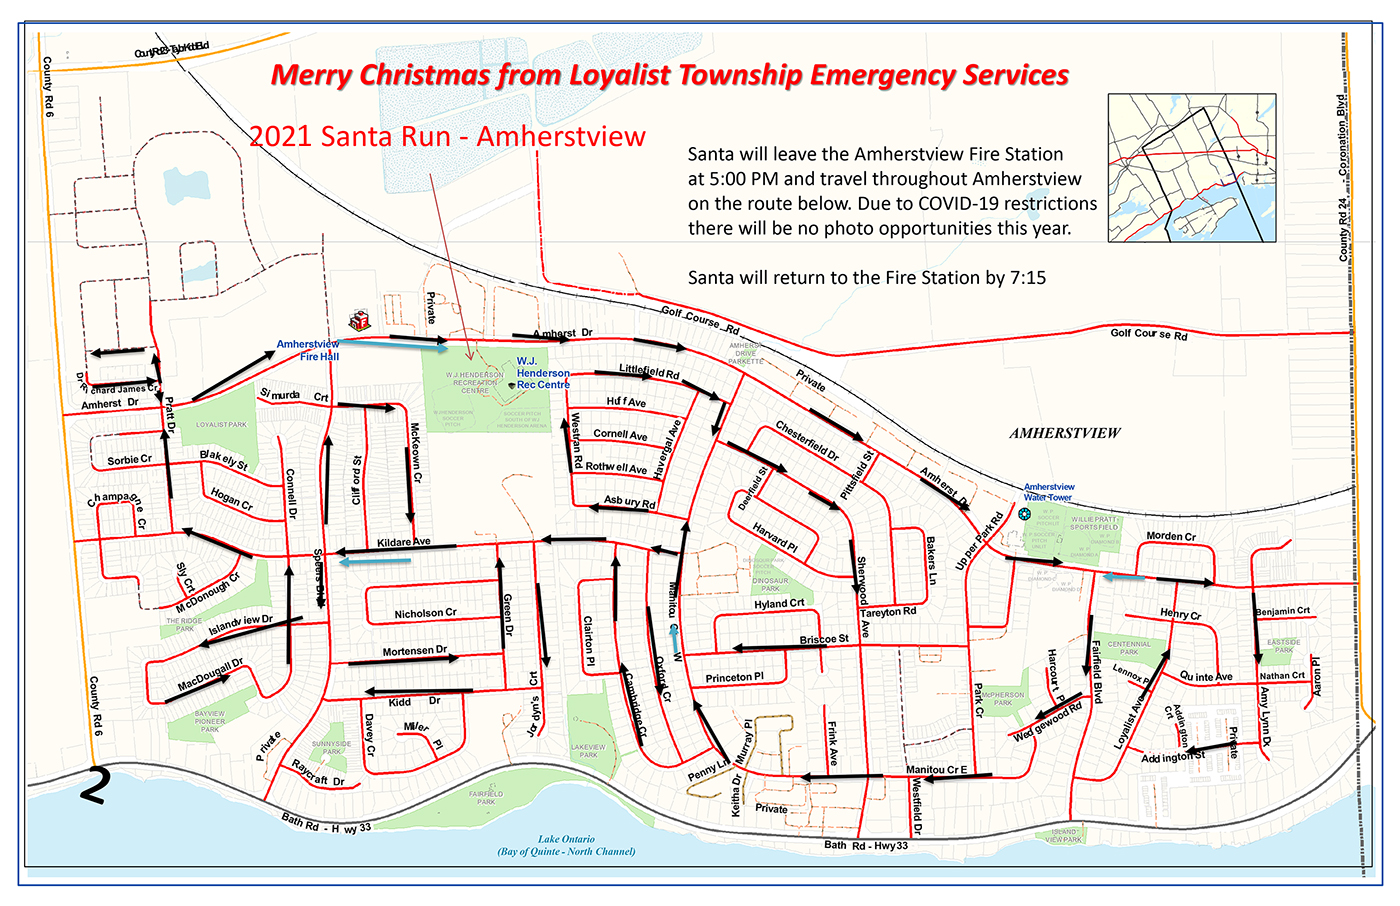 Map of Amherstview with arrows to display the route that Santa Claus will travel for the 2021 Santa Run